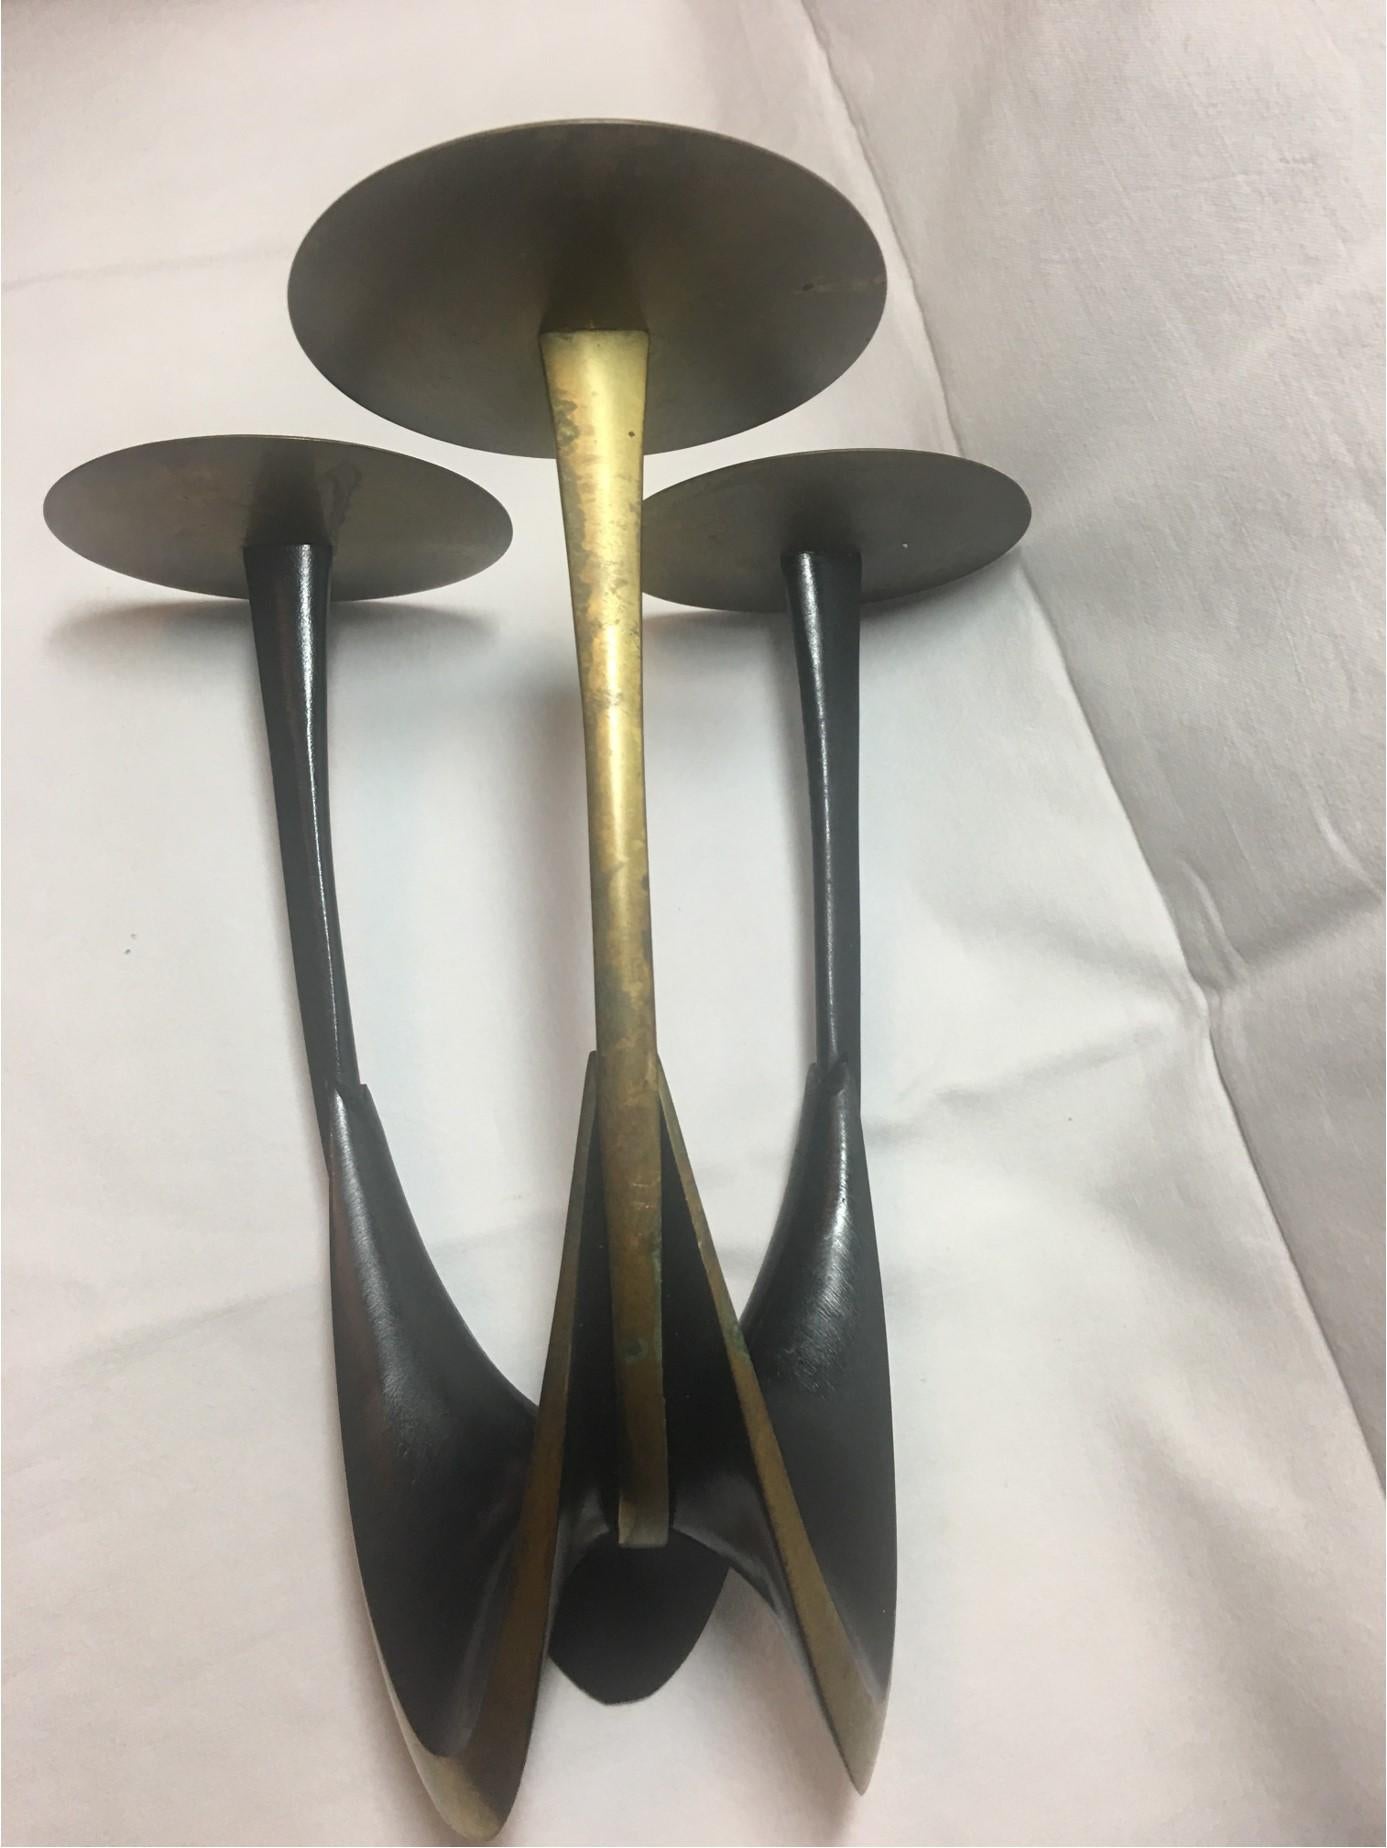 1950s Brass Three-Armed Candleholder by Klaus Ullrich for Faber & Schumacher In Good Condition For Sale In Frisco, TX